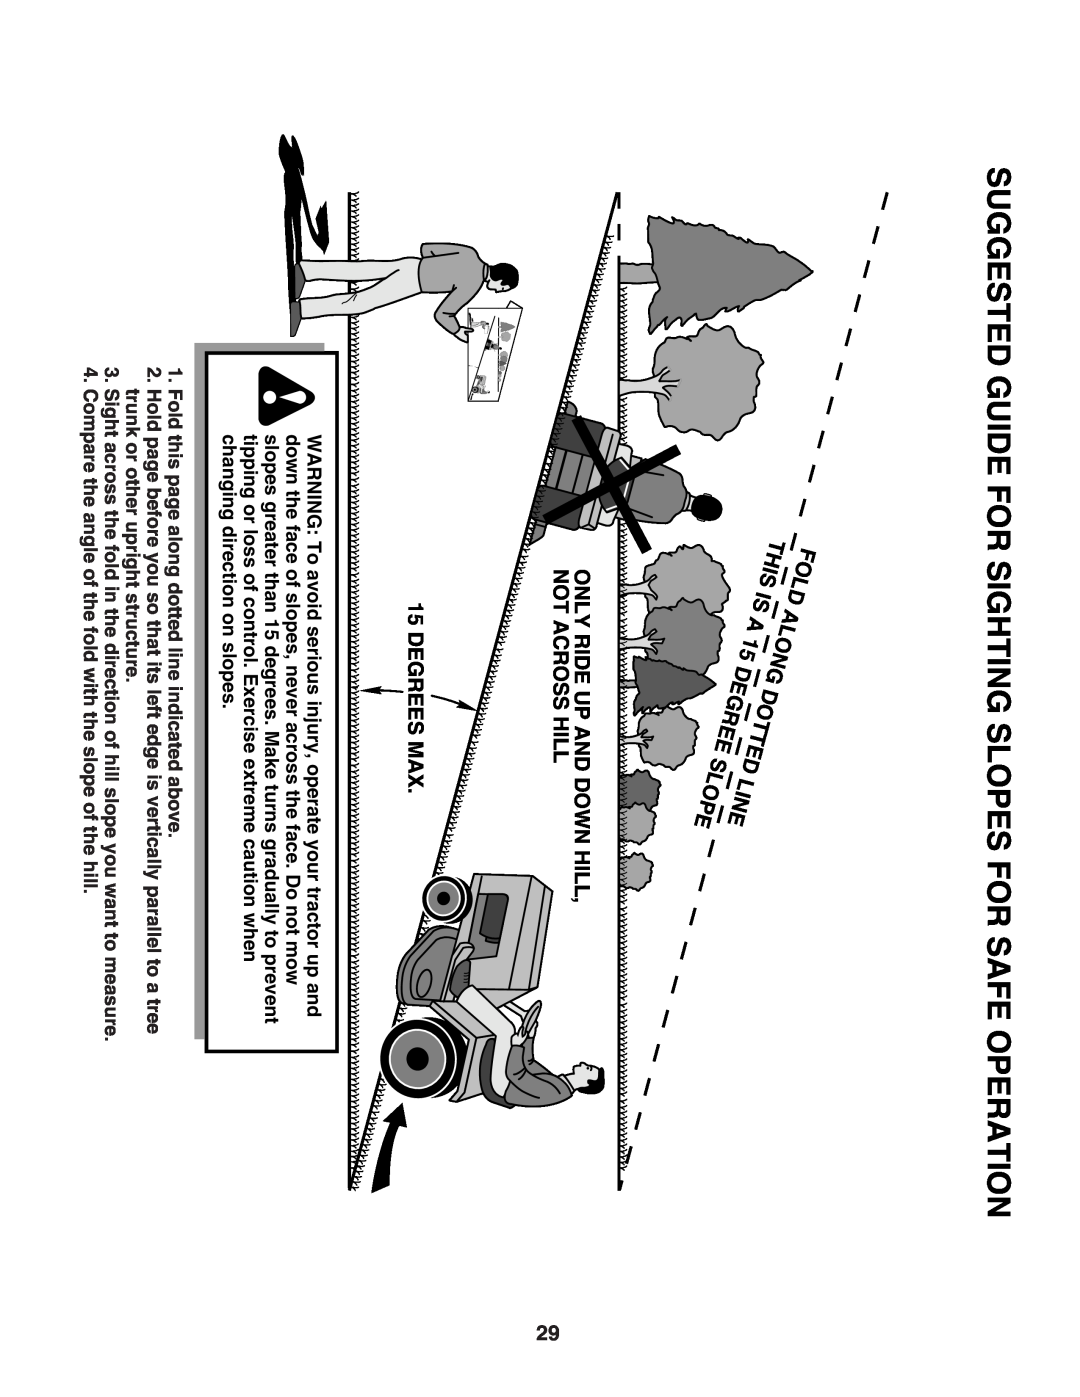 Poulan 405385 manual Suggested Guide For Sighting Slopes For Safe Operation 